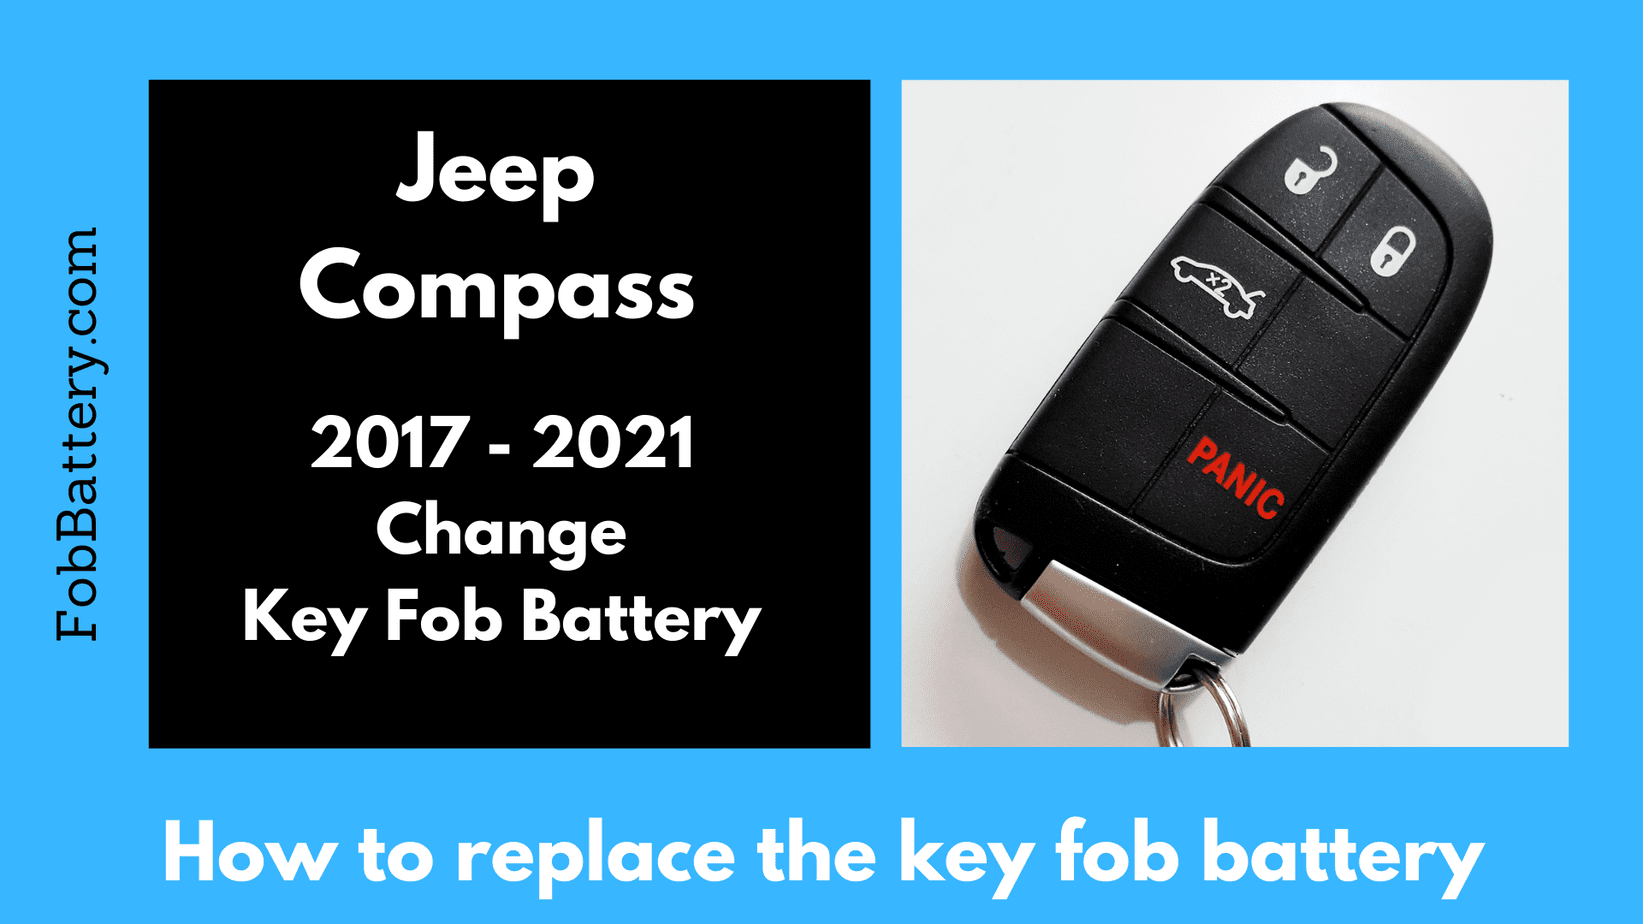 Jeep Key FOB Remote COMPATIBLE{*} 2 CR2032 REPLACEMENT BATTERIES EXP 2025 